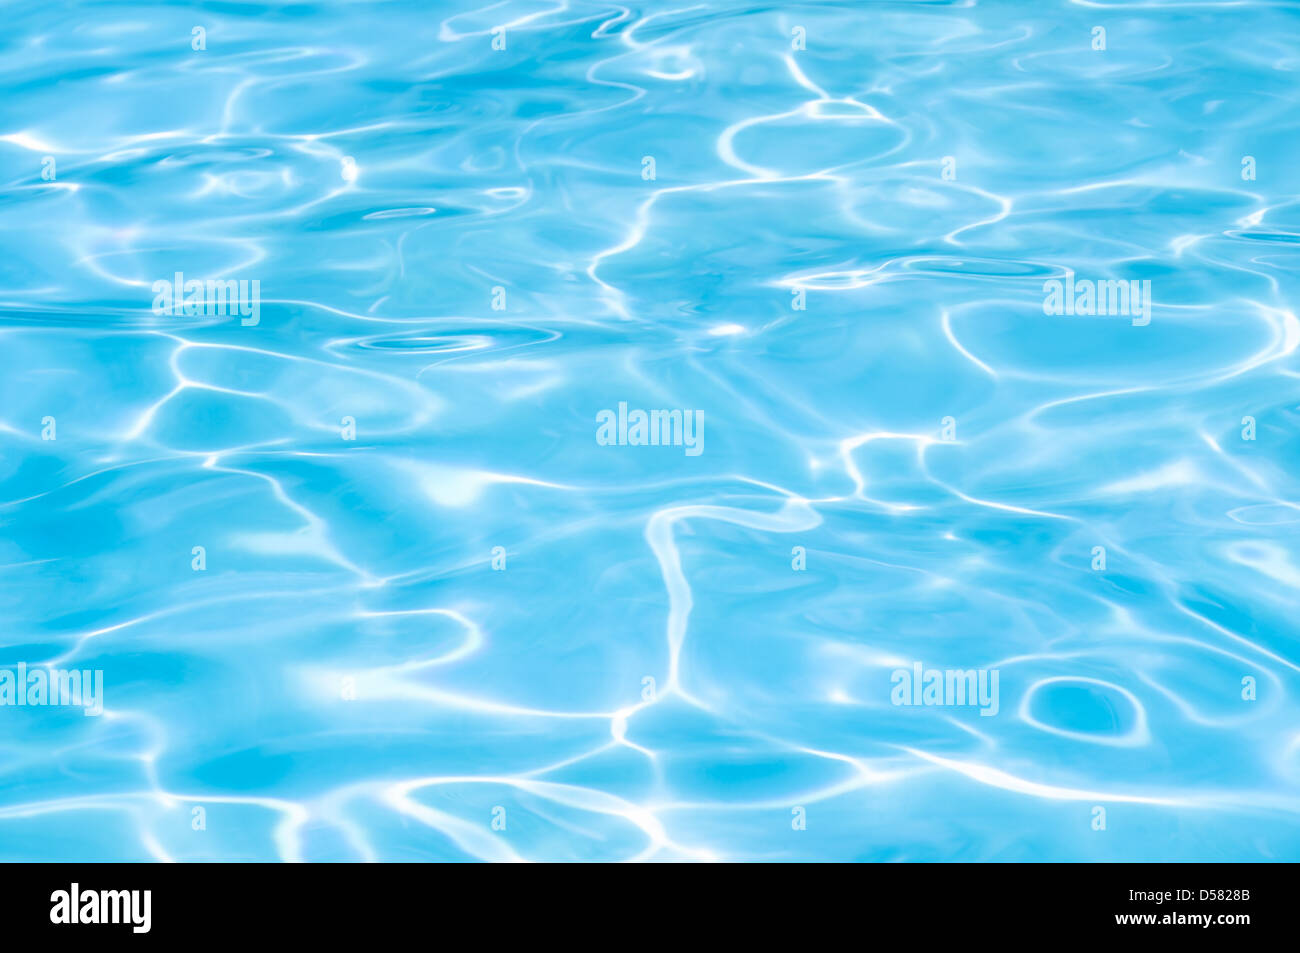 Clear pool water ripples, Blue water surface with waves. Stock Photo